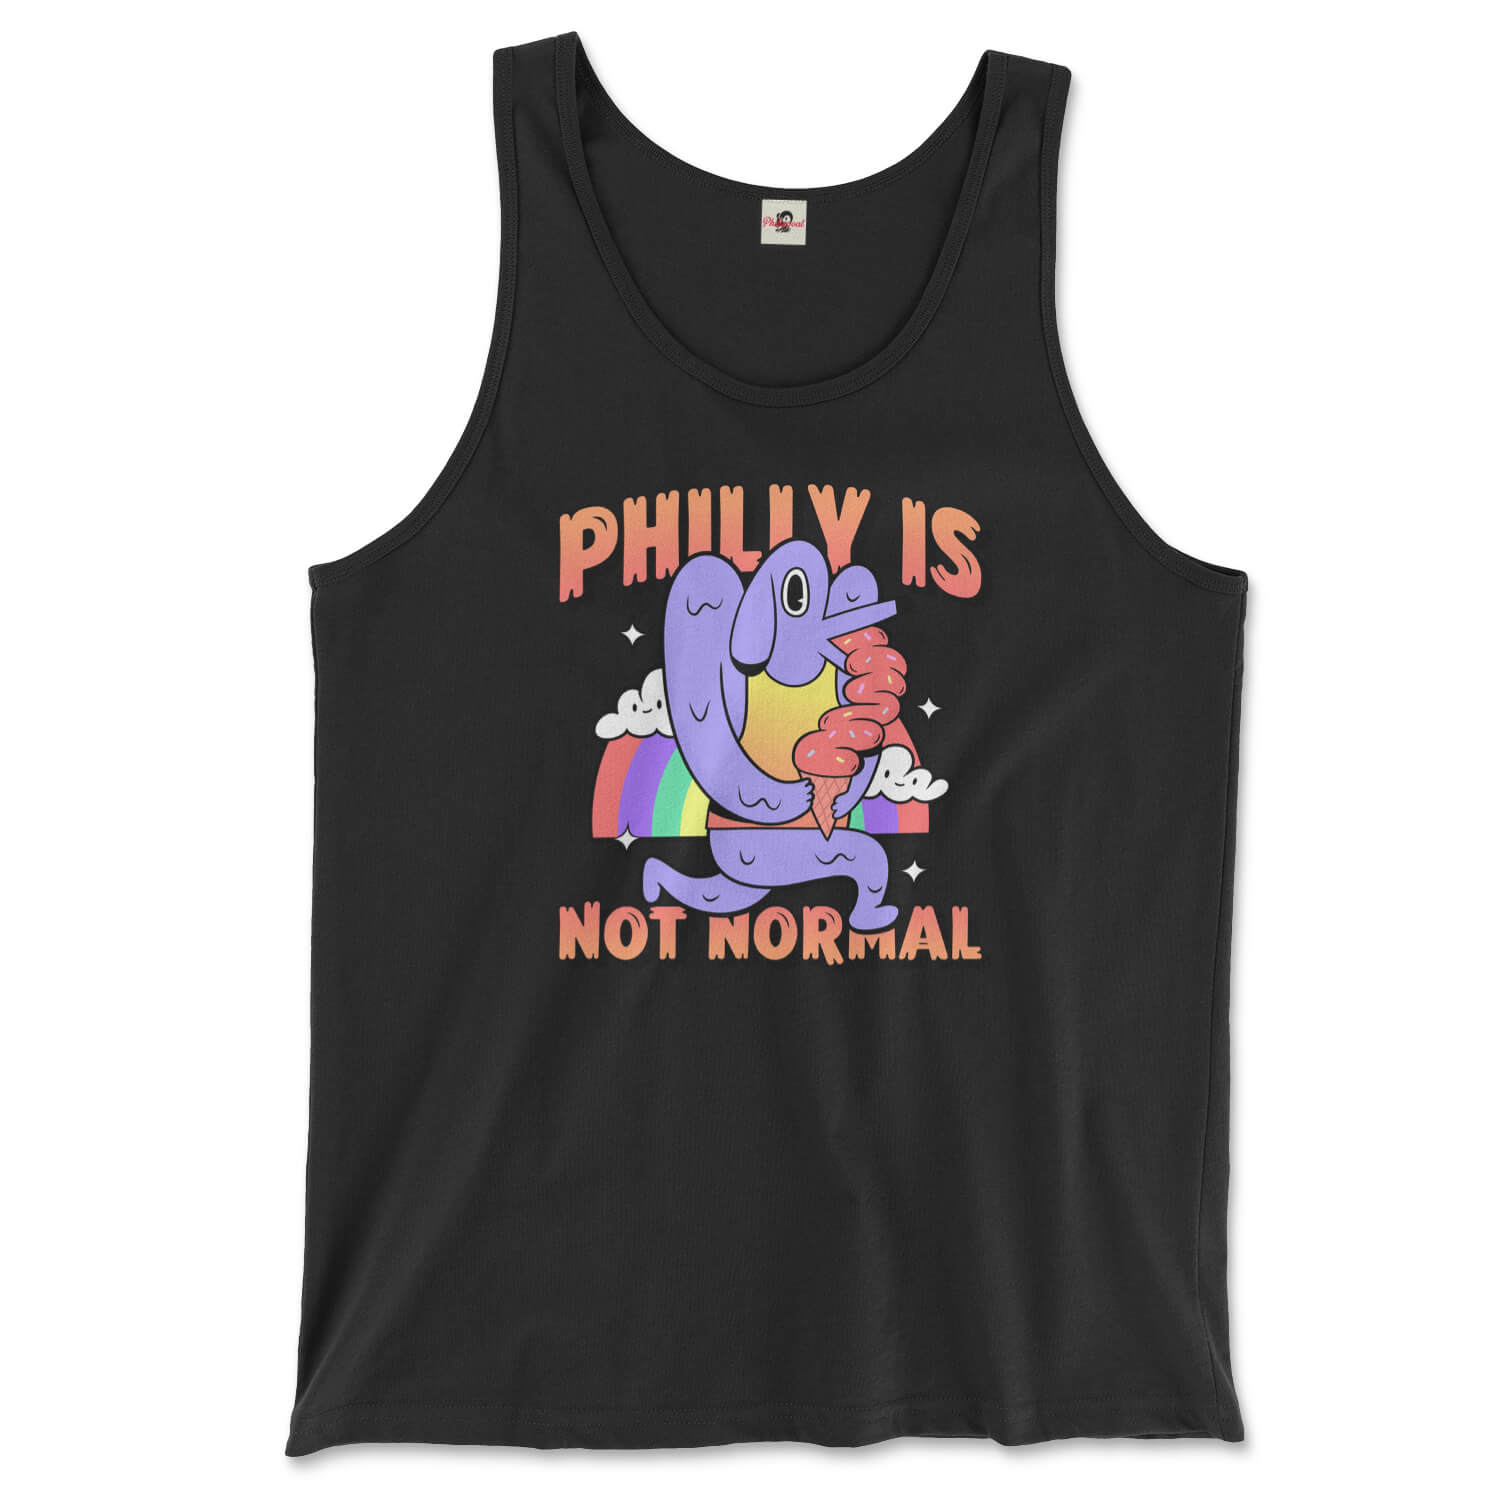 Philadelphia philly is not normal weird dog ice cream rainbow design on a black tank top from Phillygoat